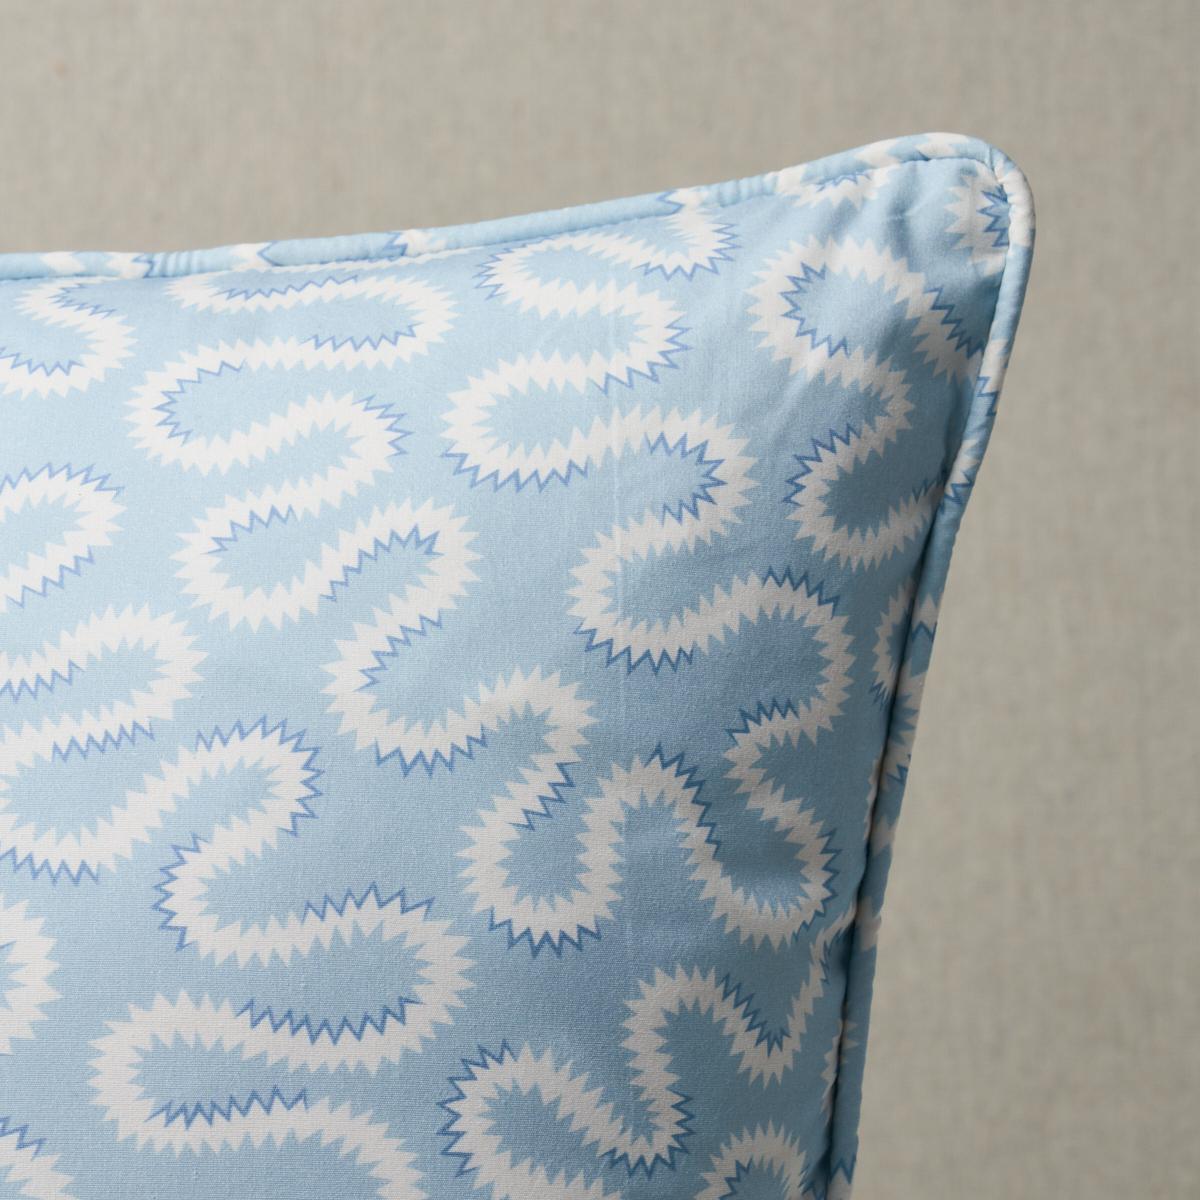 This pillow features Zoelie with a self welt finish. Inspired by a historic document print, Zoelie fabric in aqua is a modern take on a traditional vermicelli motif. Pillow includes a feather/down fill insert and hidden zipper closure.

*If out of